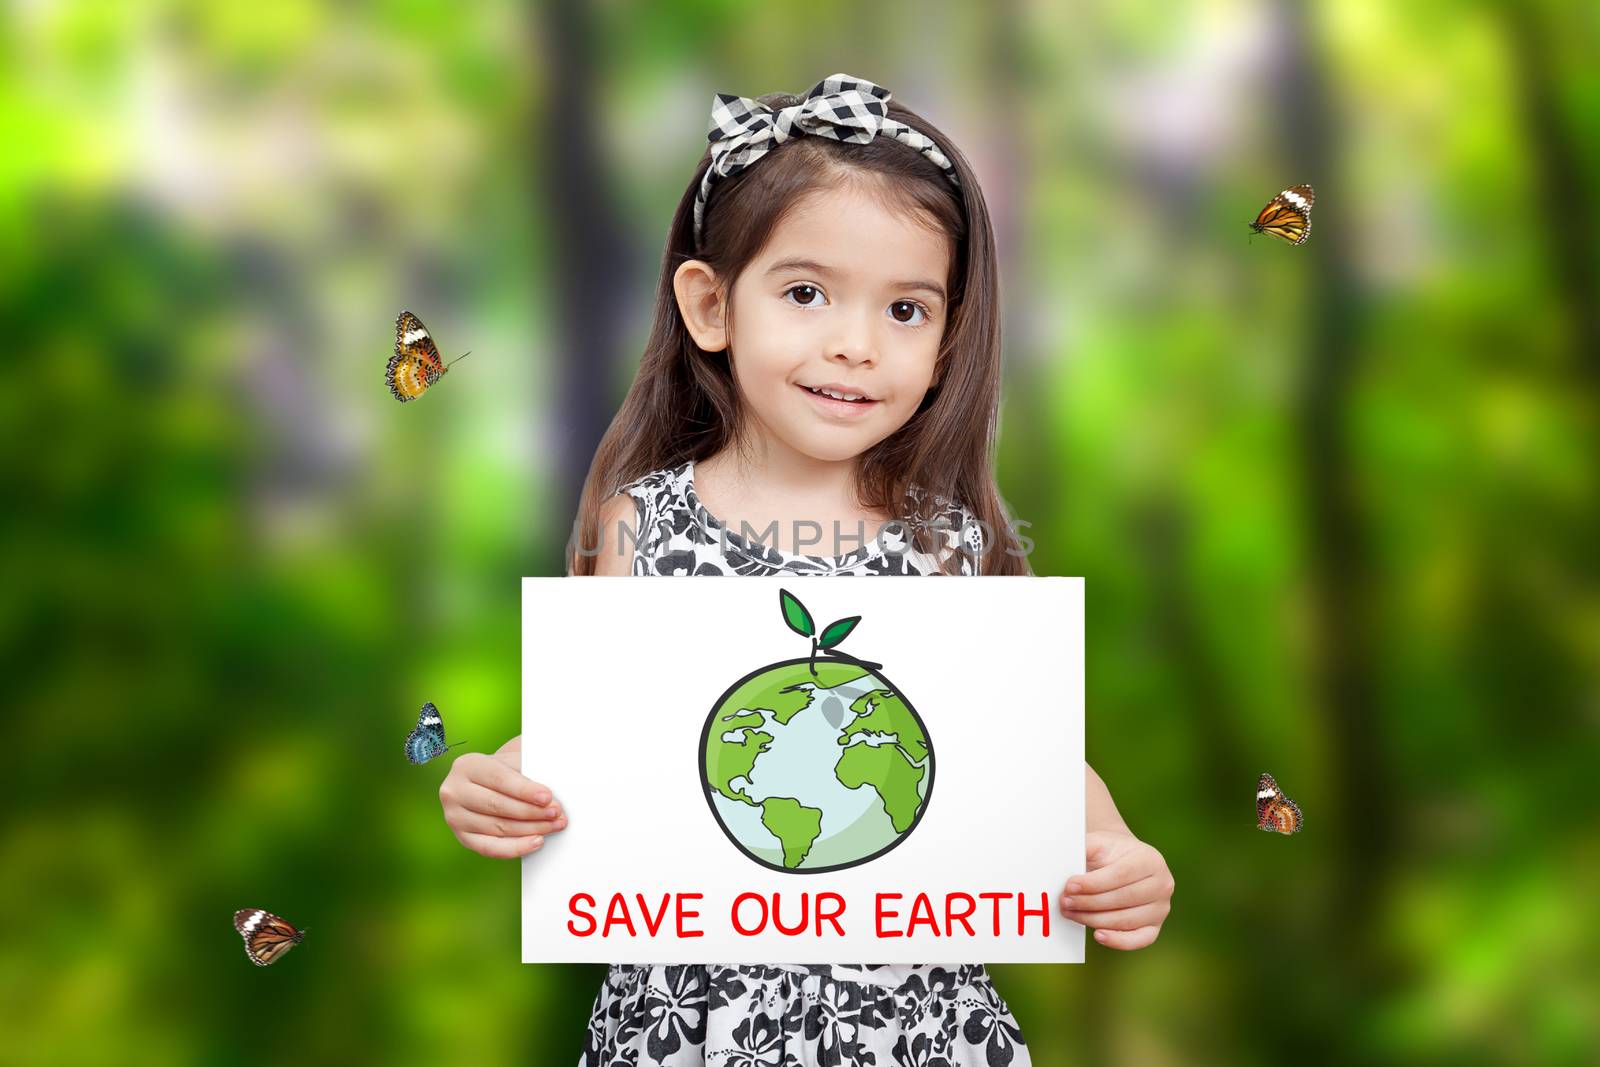 children hold paper drawing Earth and green seedling growth and word save our Earth with green tree background and butterfly flying around. children care for environmental awareness. Earth Day concept